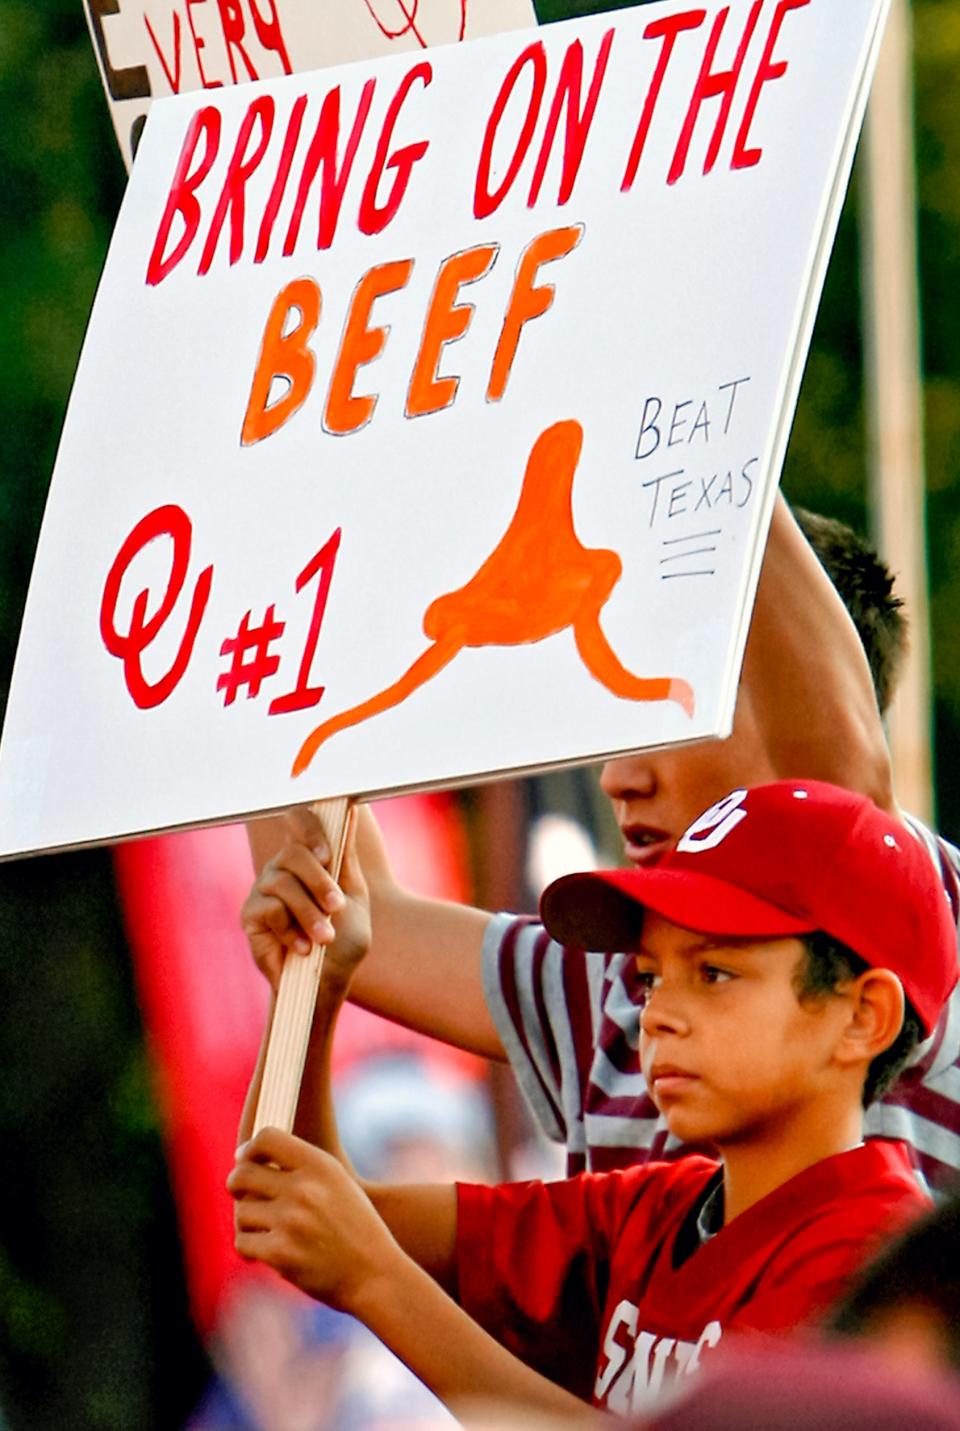 A Sooners fan holds up a sign in an effort to get noticed on ESPN's College GameDay broadcast before the 2008 Texas-Oklahoma game. Saturday's matchup of No. 3 Texas and No. 12 OU will again draw GameDay to the Cotton Bowl.